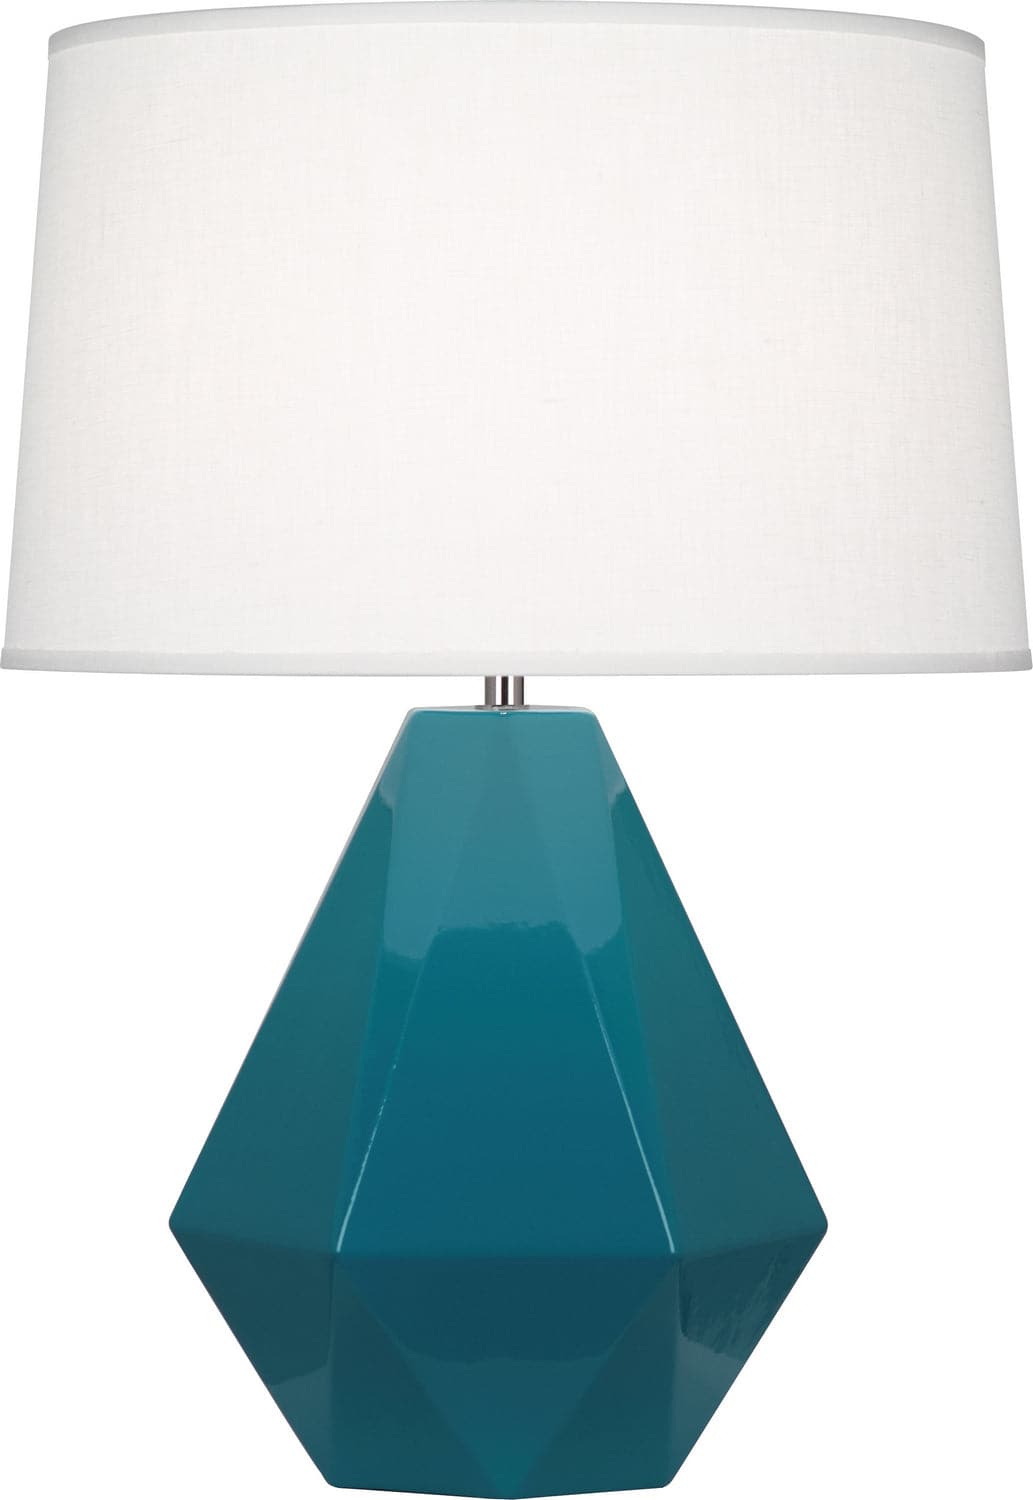 Robert Abbey - 934 - One Light Table Lamp - Delta - Peacock Glazed w/Polished Nickel